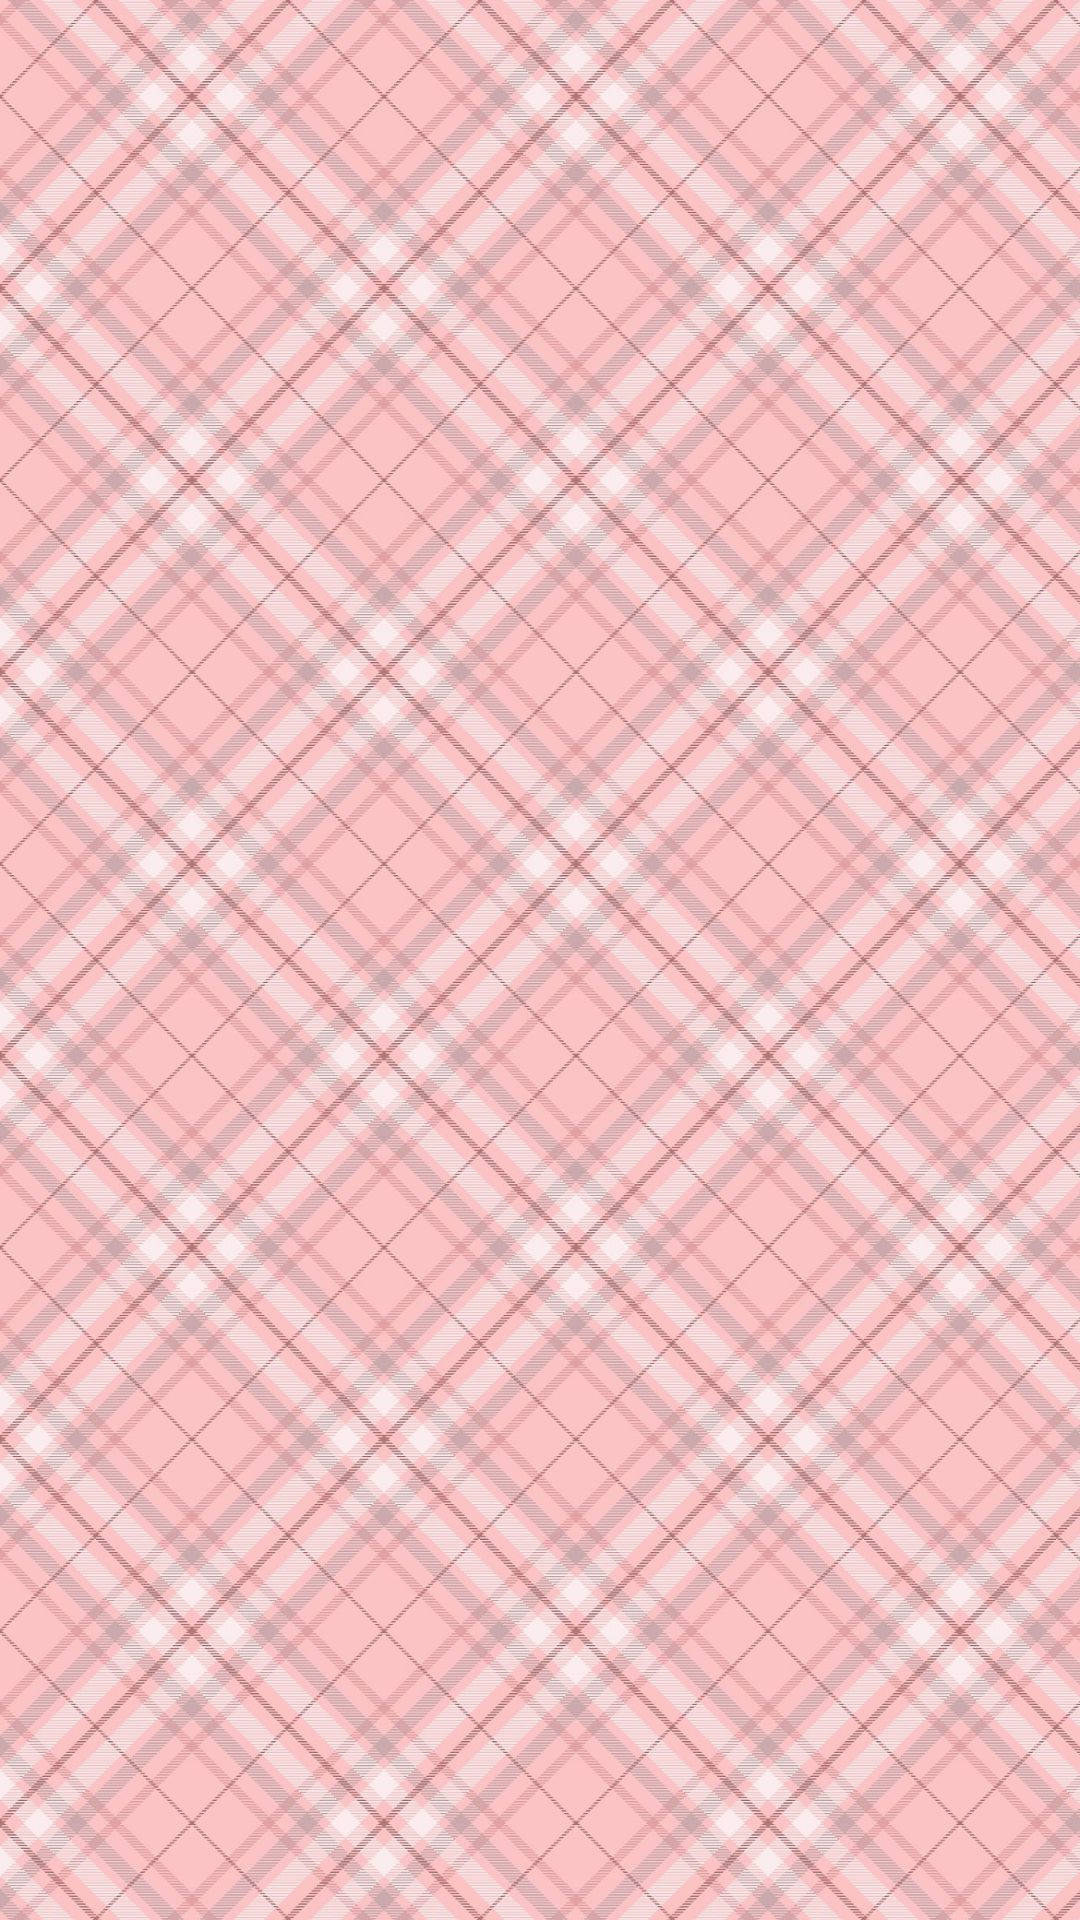 Pink Plaid iPhone 8 Wallpaper with high-resolution 1080x1920 pixel. You can use this wallpaper for your iPhone 5, 6, 7, 8, X, XS, XR backgrounds, Mobile Screensaver, or iPad Lock Screen - Checkered